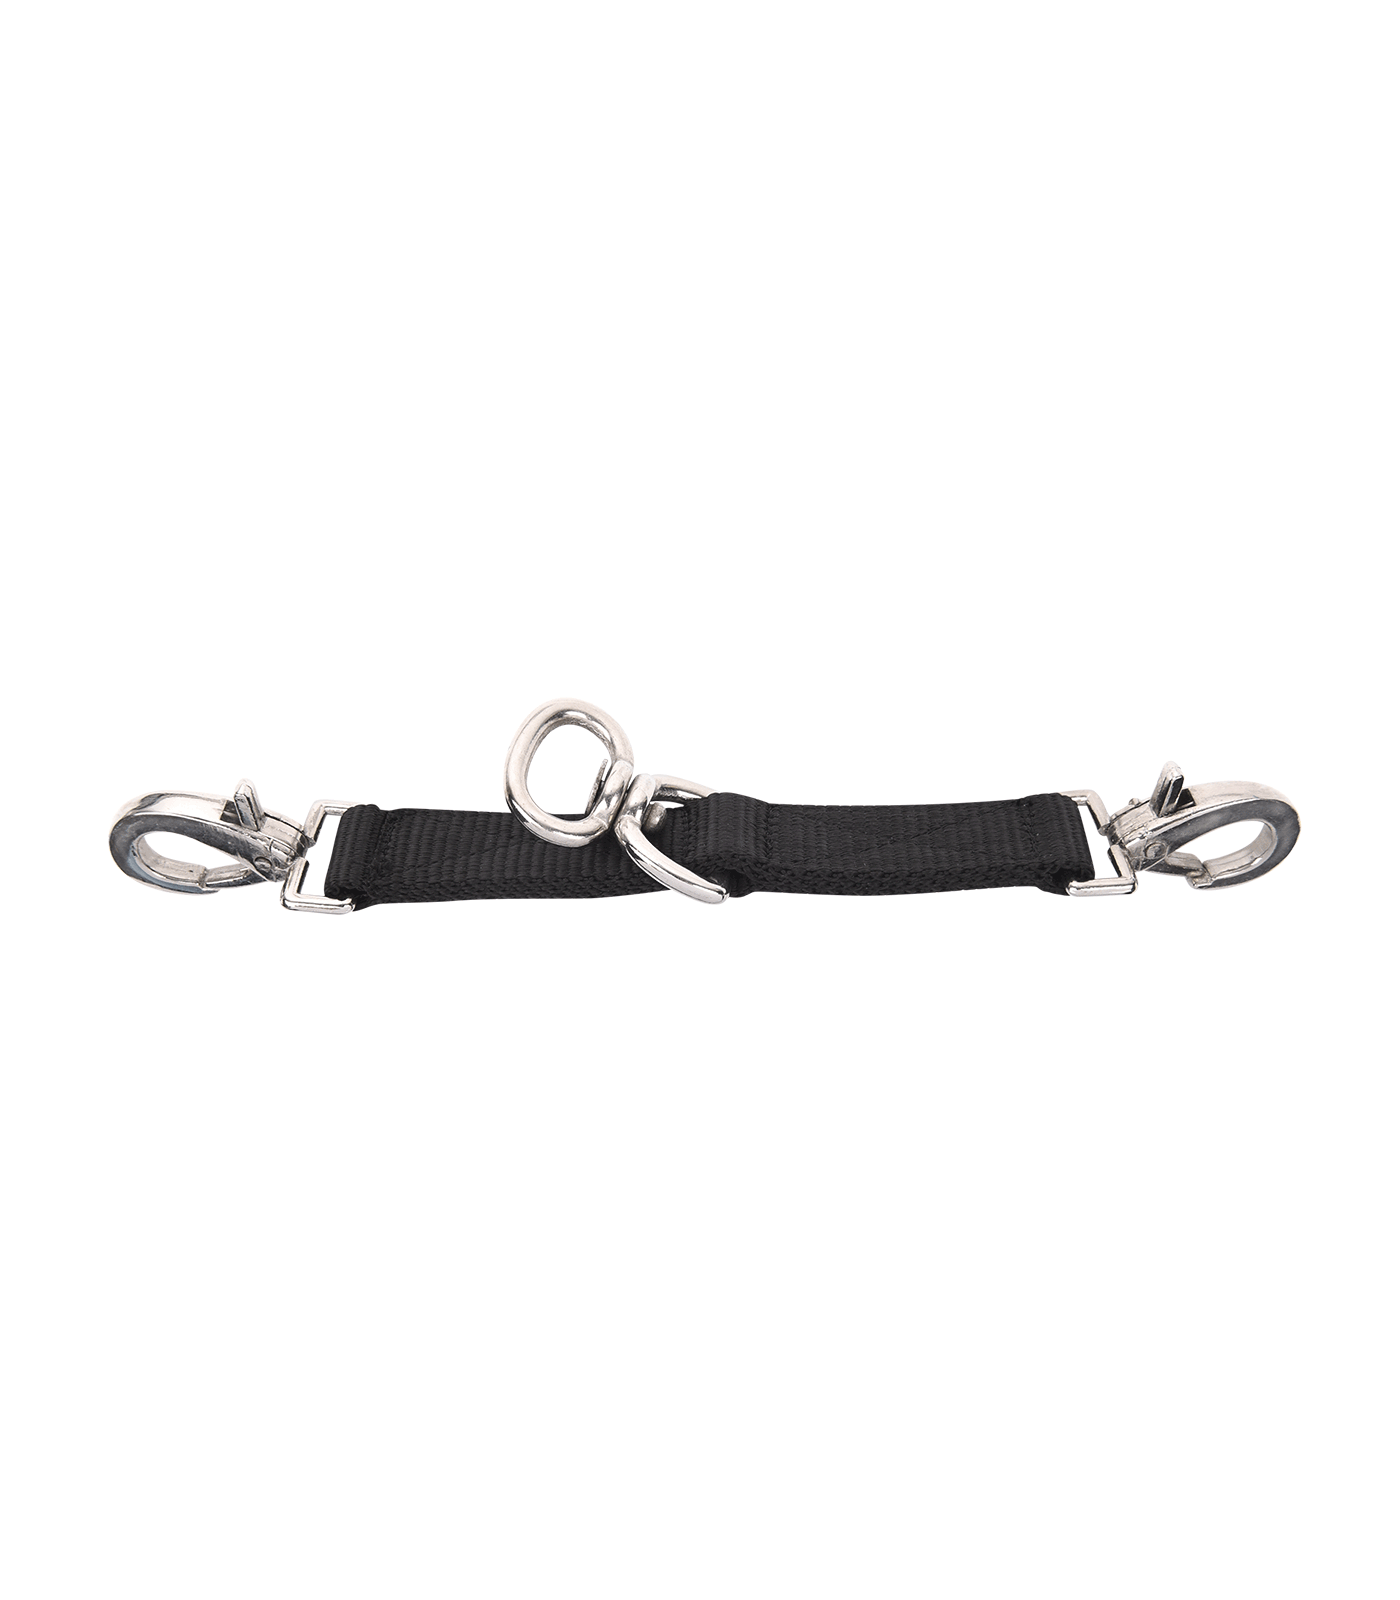 Lunging attachment with swivel black